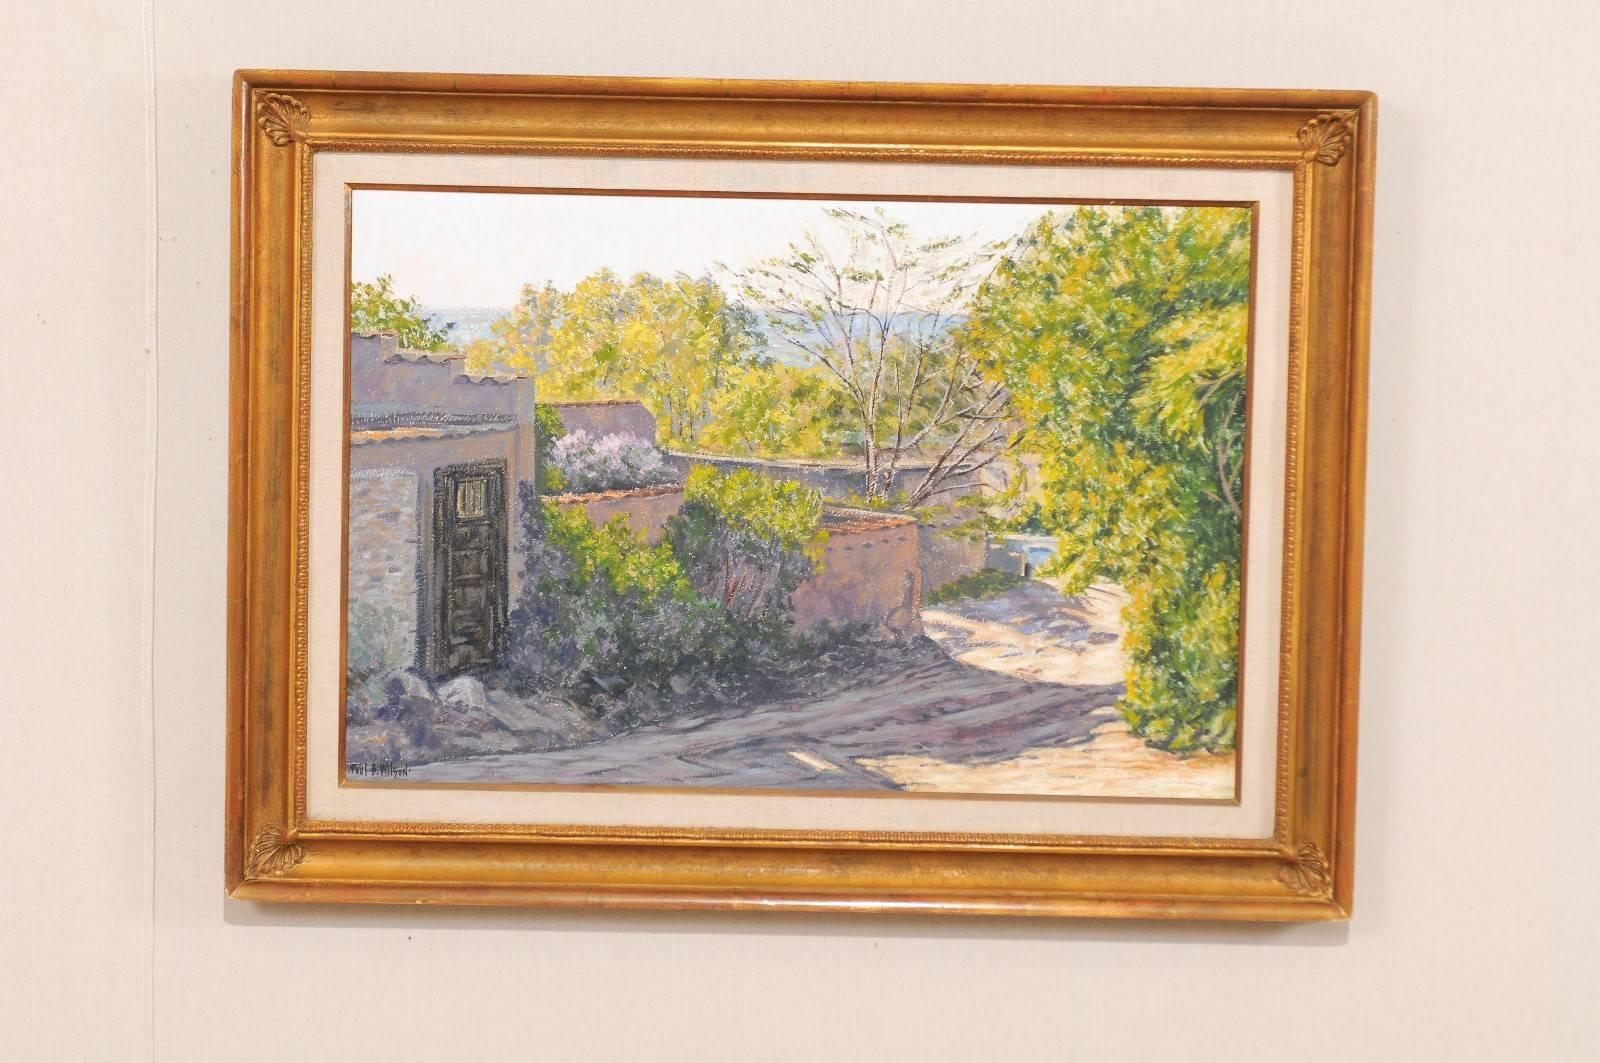 A medium sized oil painting by American artist Paul B. Wilson. This is a lovely painting depicts a Spanish Colonial style homestead and surrounding landscape in Santa Fe, New Mexico. There is a beautiful sense of light in this painting, from the